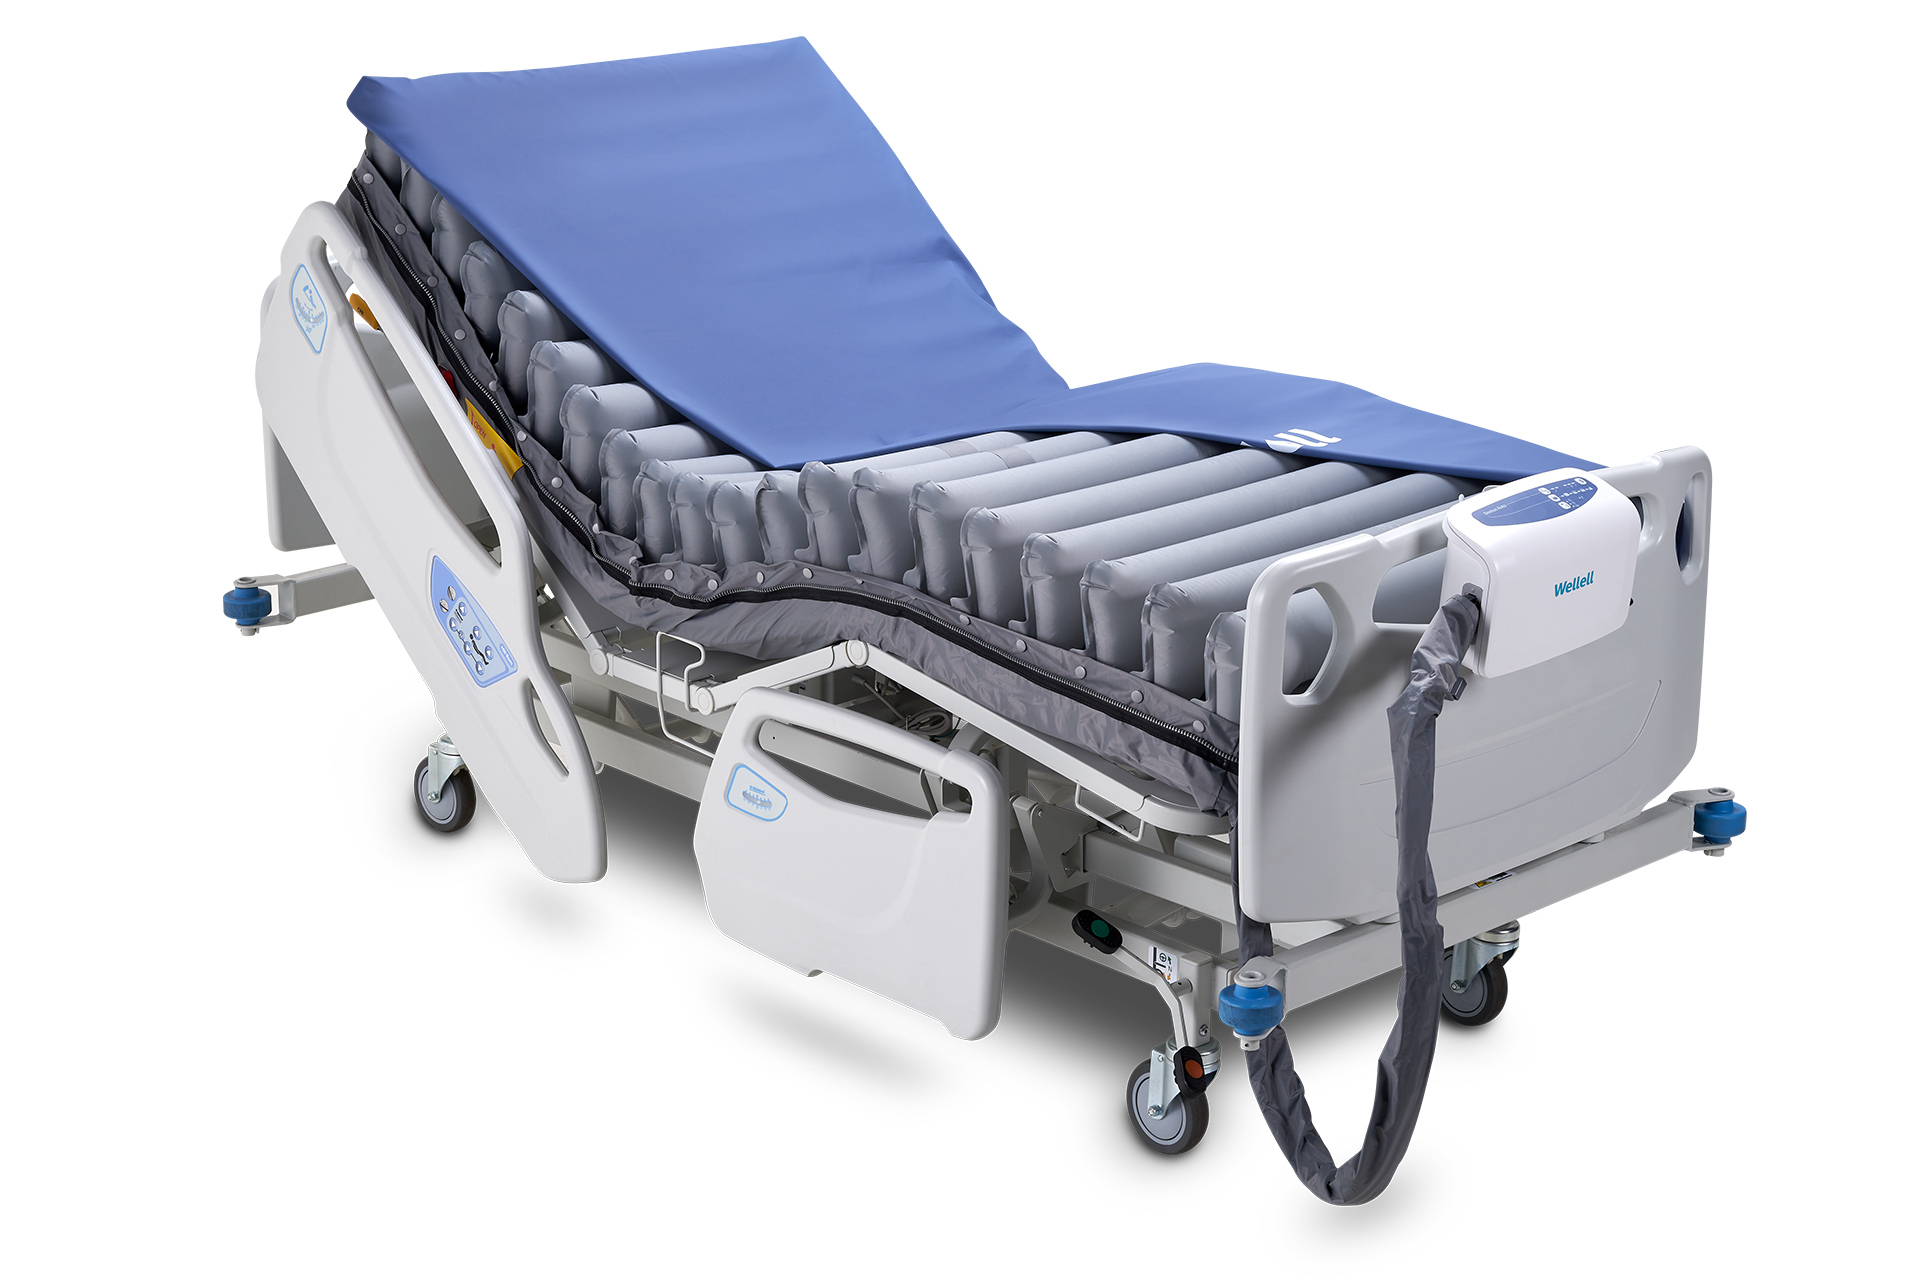 Domus Auto - Medical Bed - Wellell UK